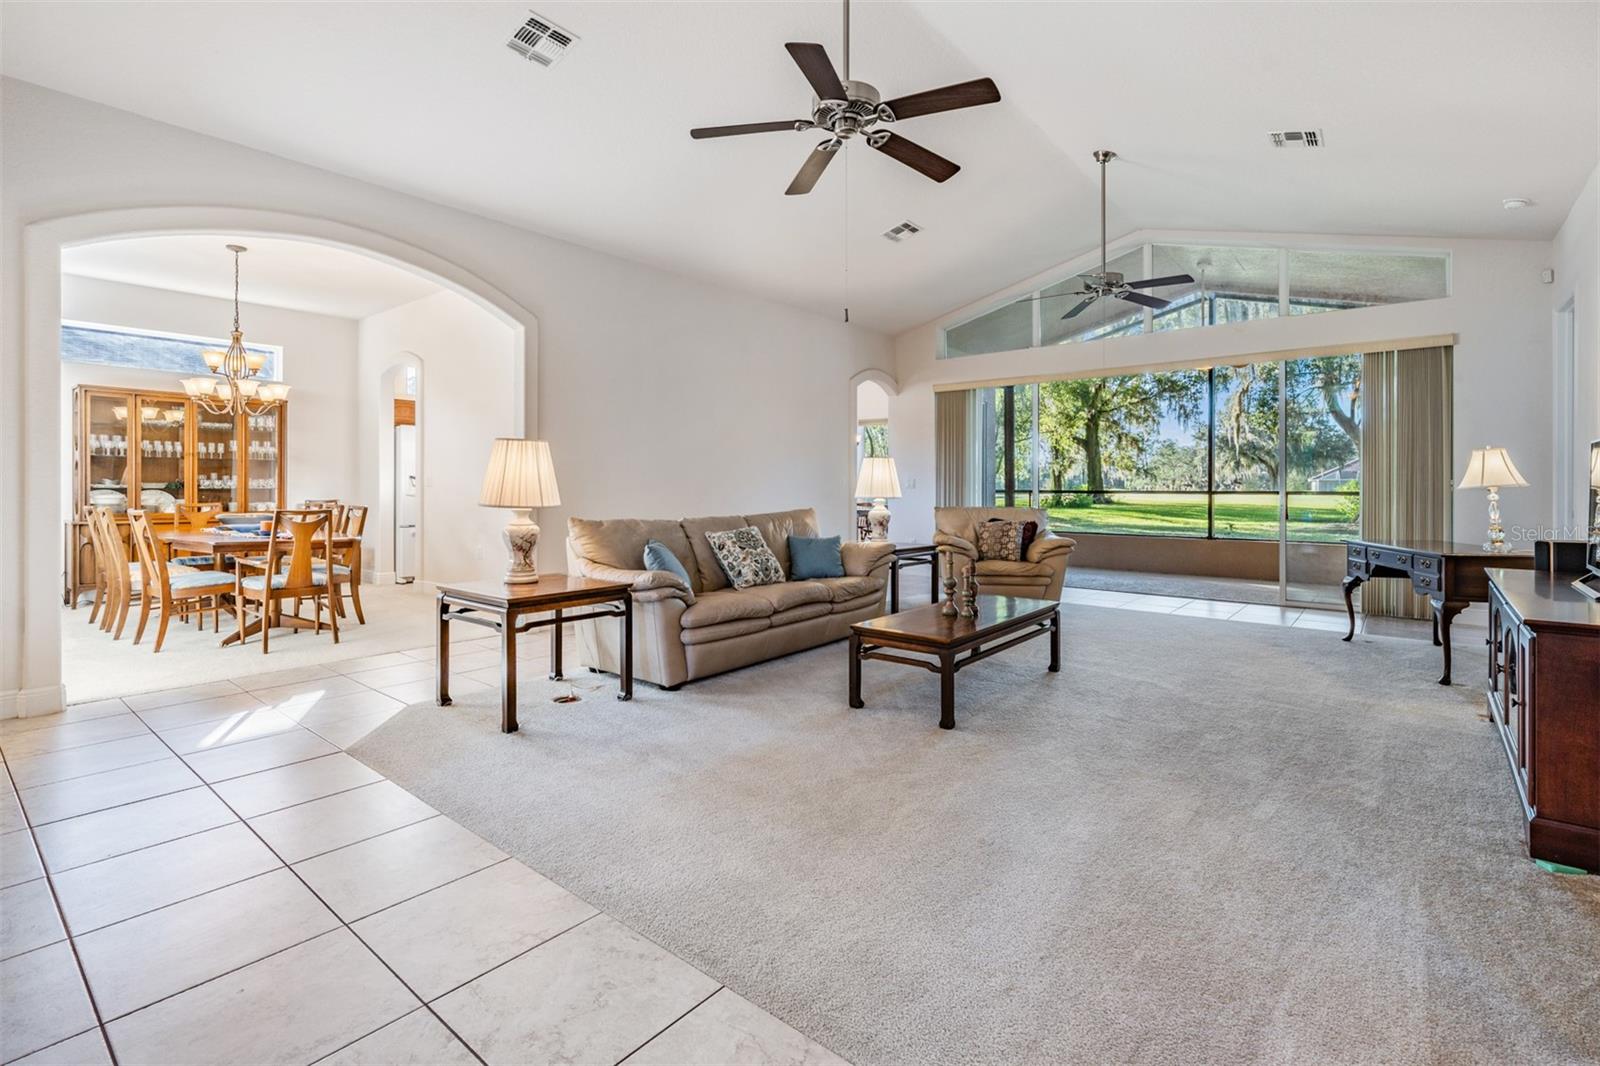 Light, Bright OPEN Great Room with Vaulted ceilings